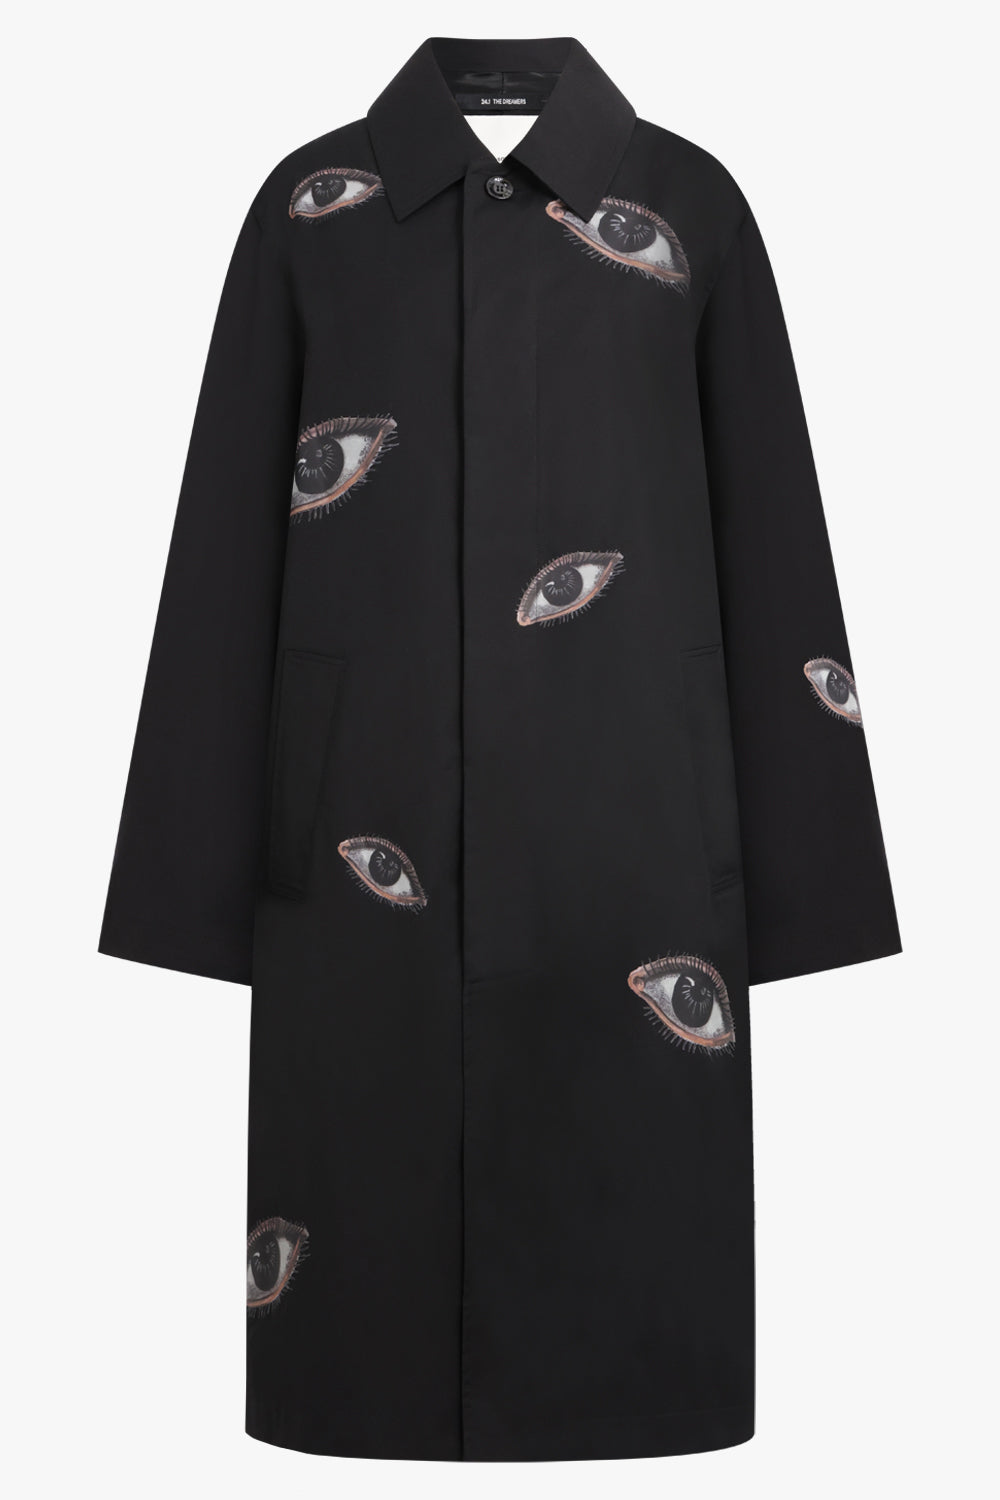 SONG FOR THE MUTE RTW FALLING EYES MAC COAT | BLACK